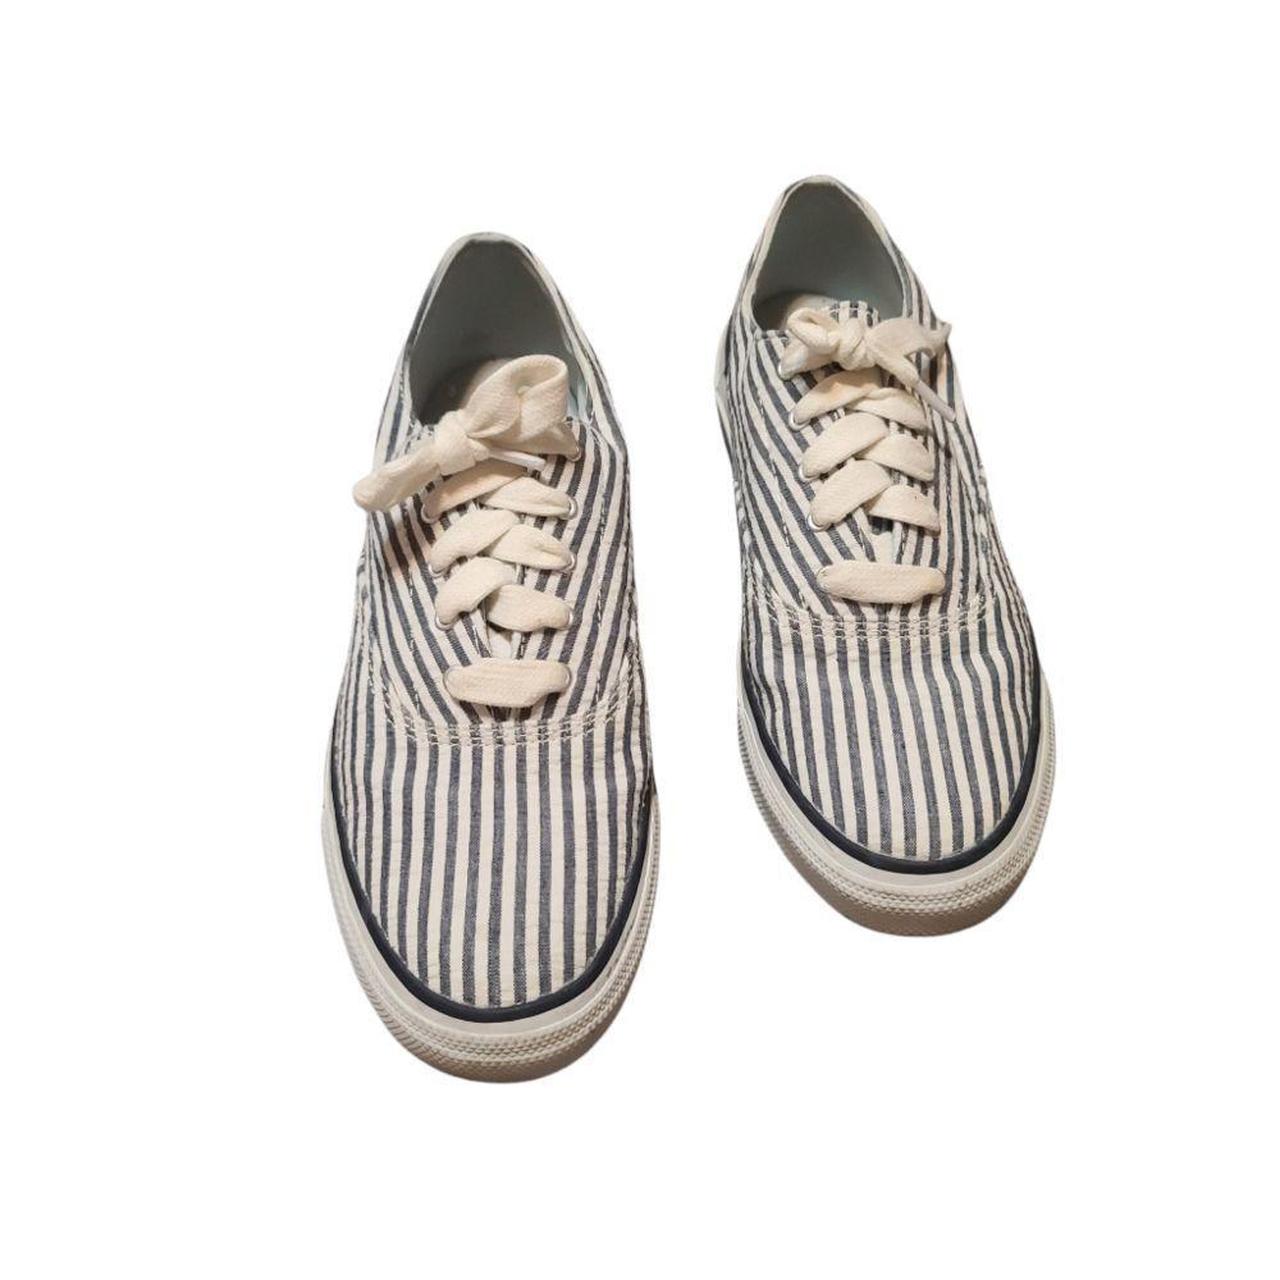 Sperry Women's Blue and White Trainers (4)